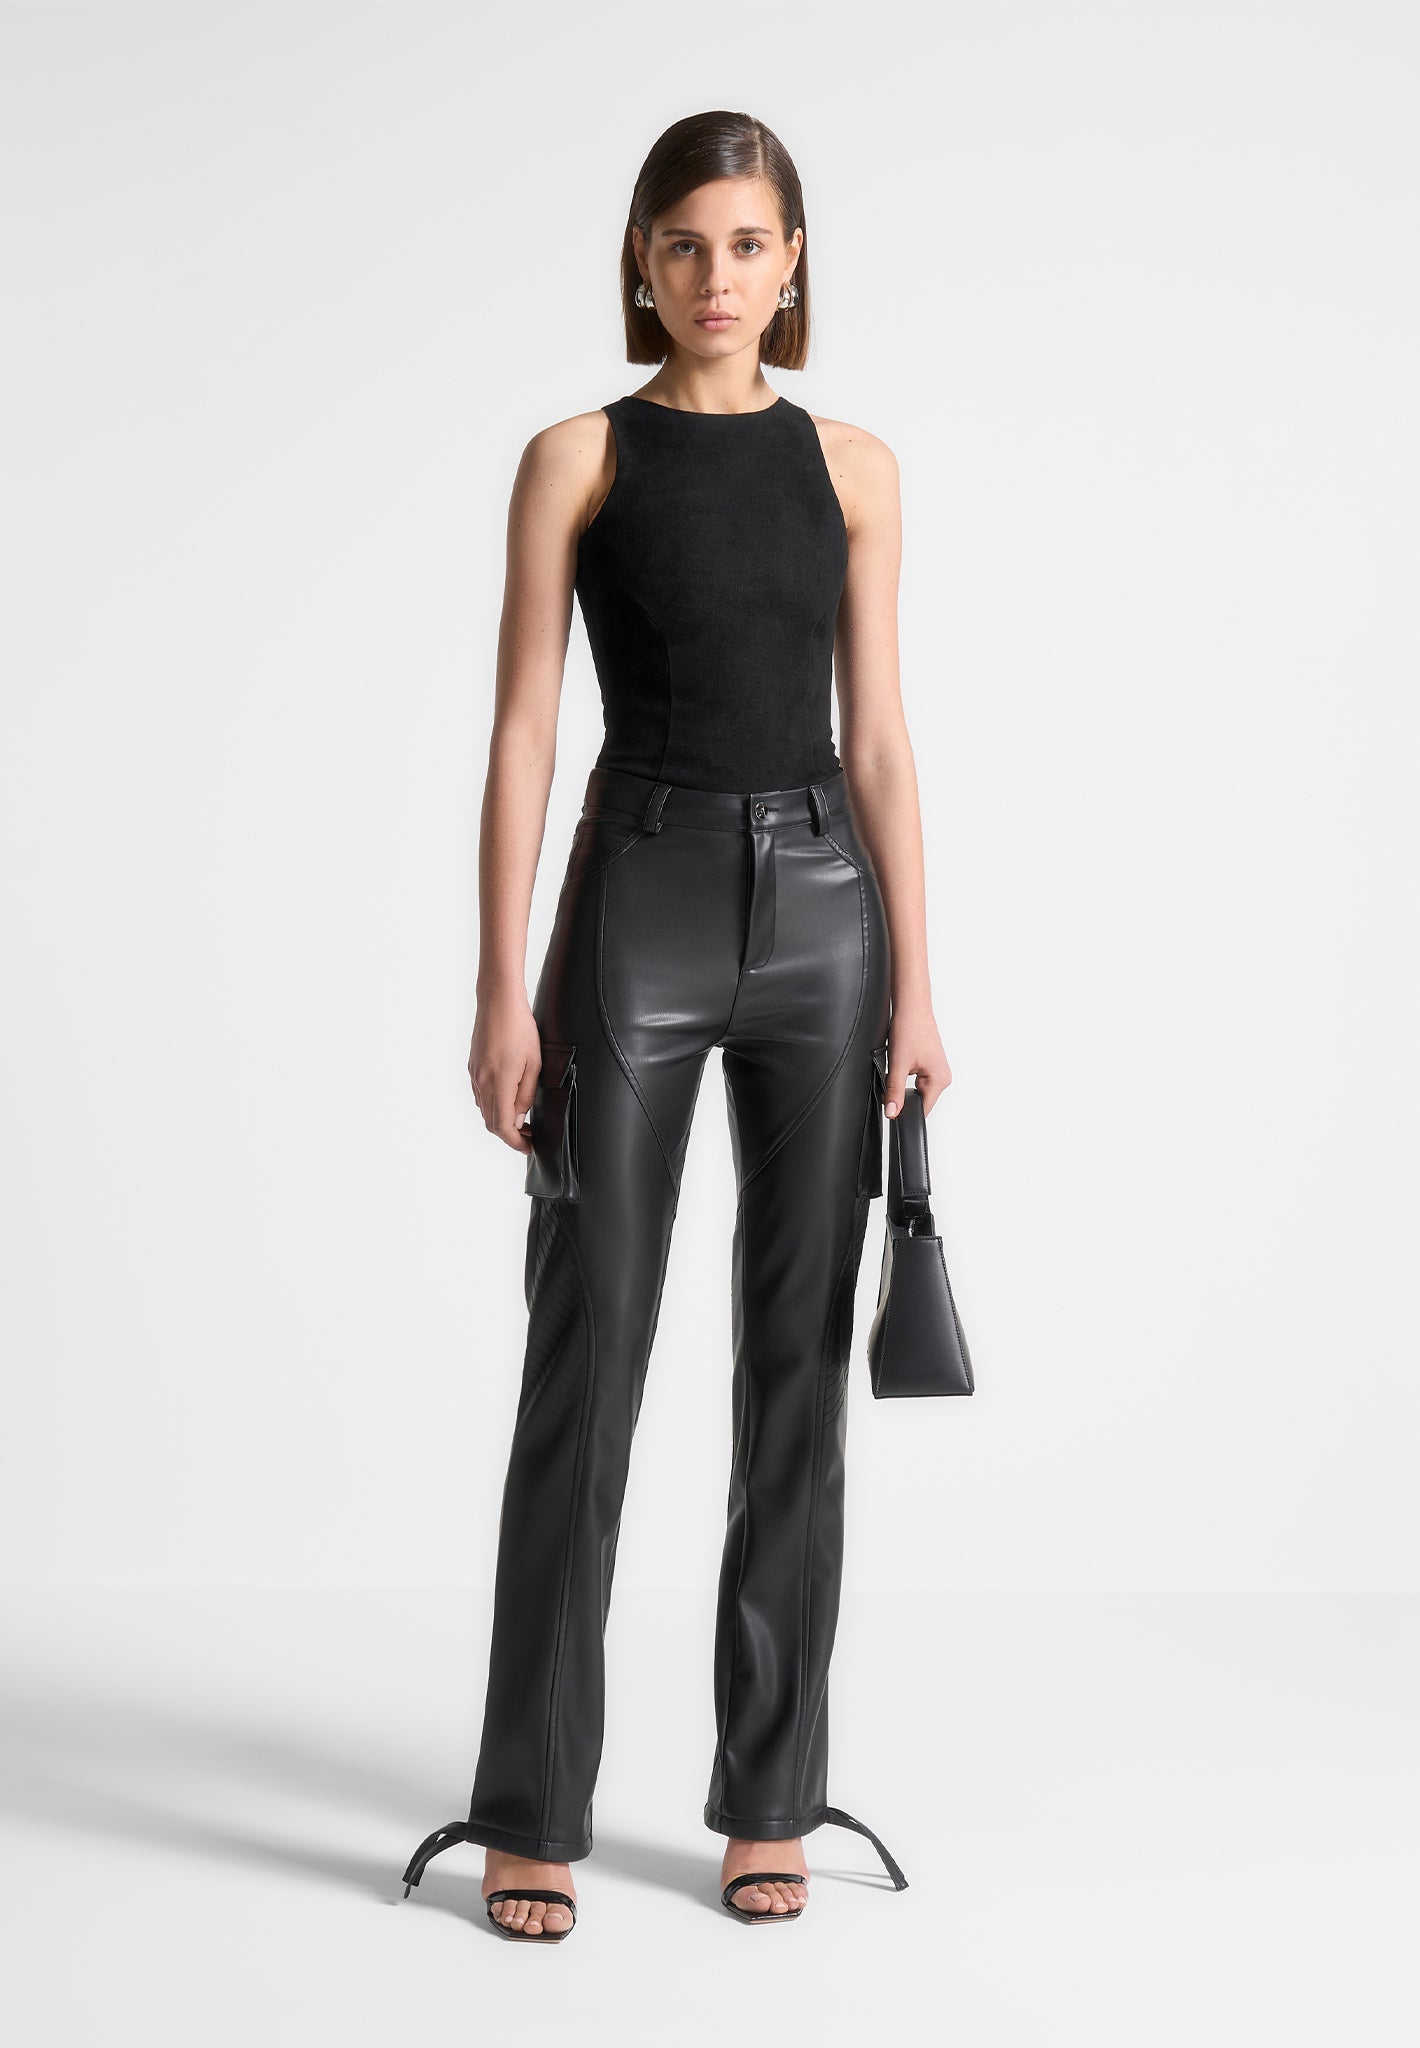 Women's Pull-on Style High Rise Faux Leather Pants With Slits at Rs 1540.19  | Ladies Leather Pants, चमड़े का वूमेन पैंट - Hari Krushna Enterprise,  Surat | ID: 2852783162155